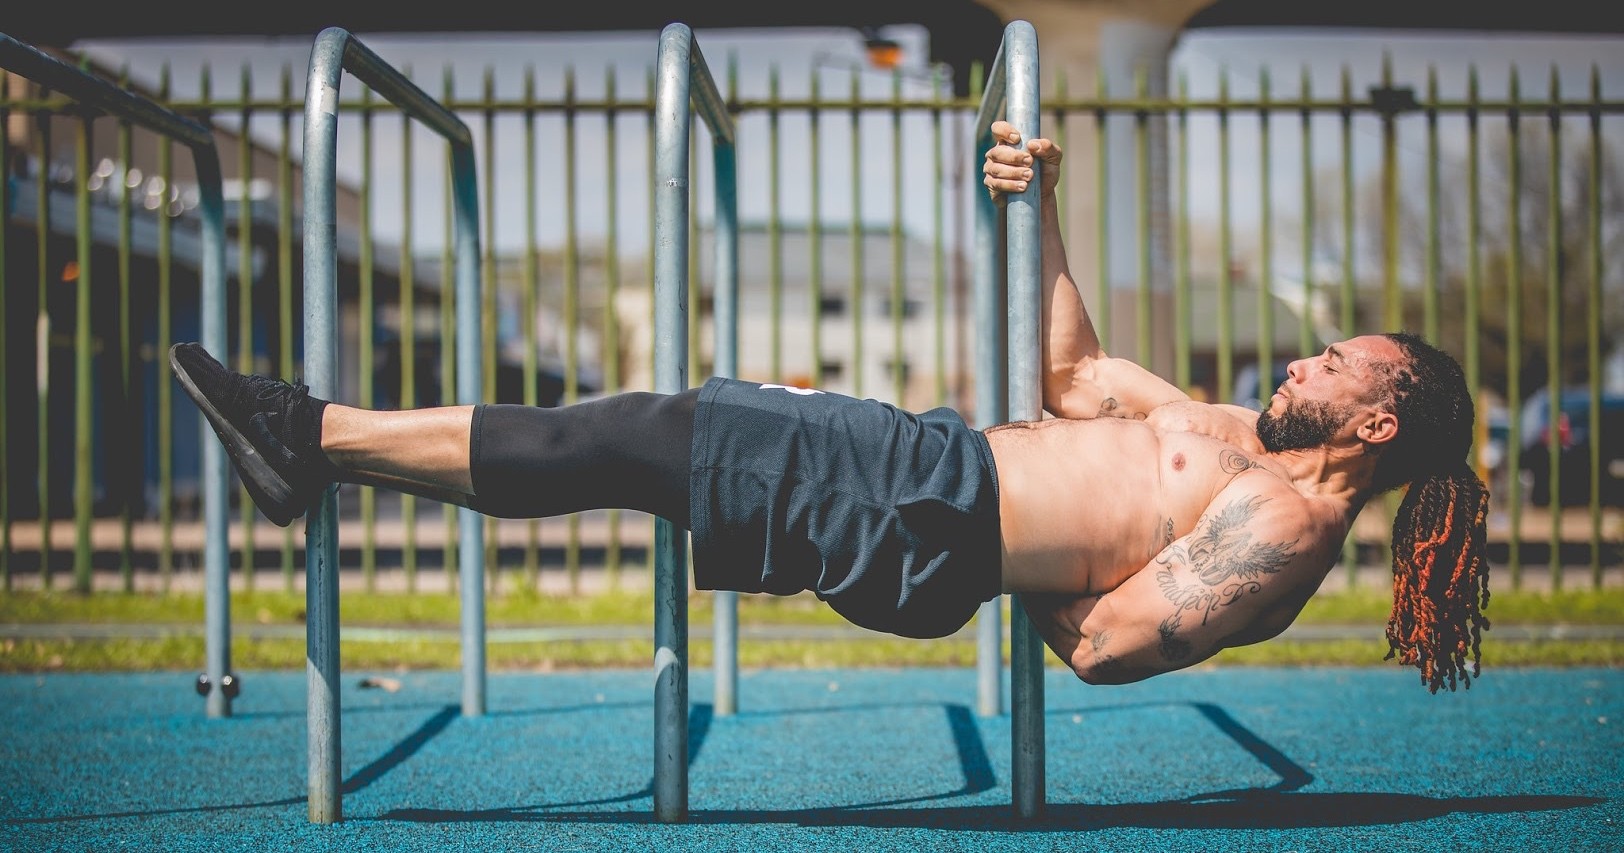 This Philly Native Was Shot. Now He's Bringing Calisthenics to the City